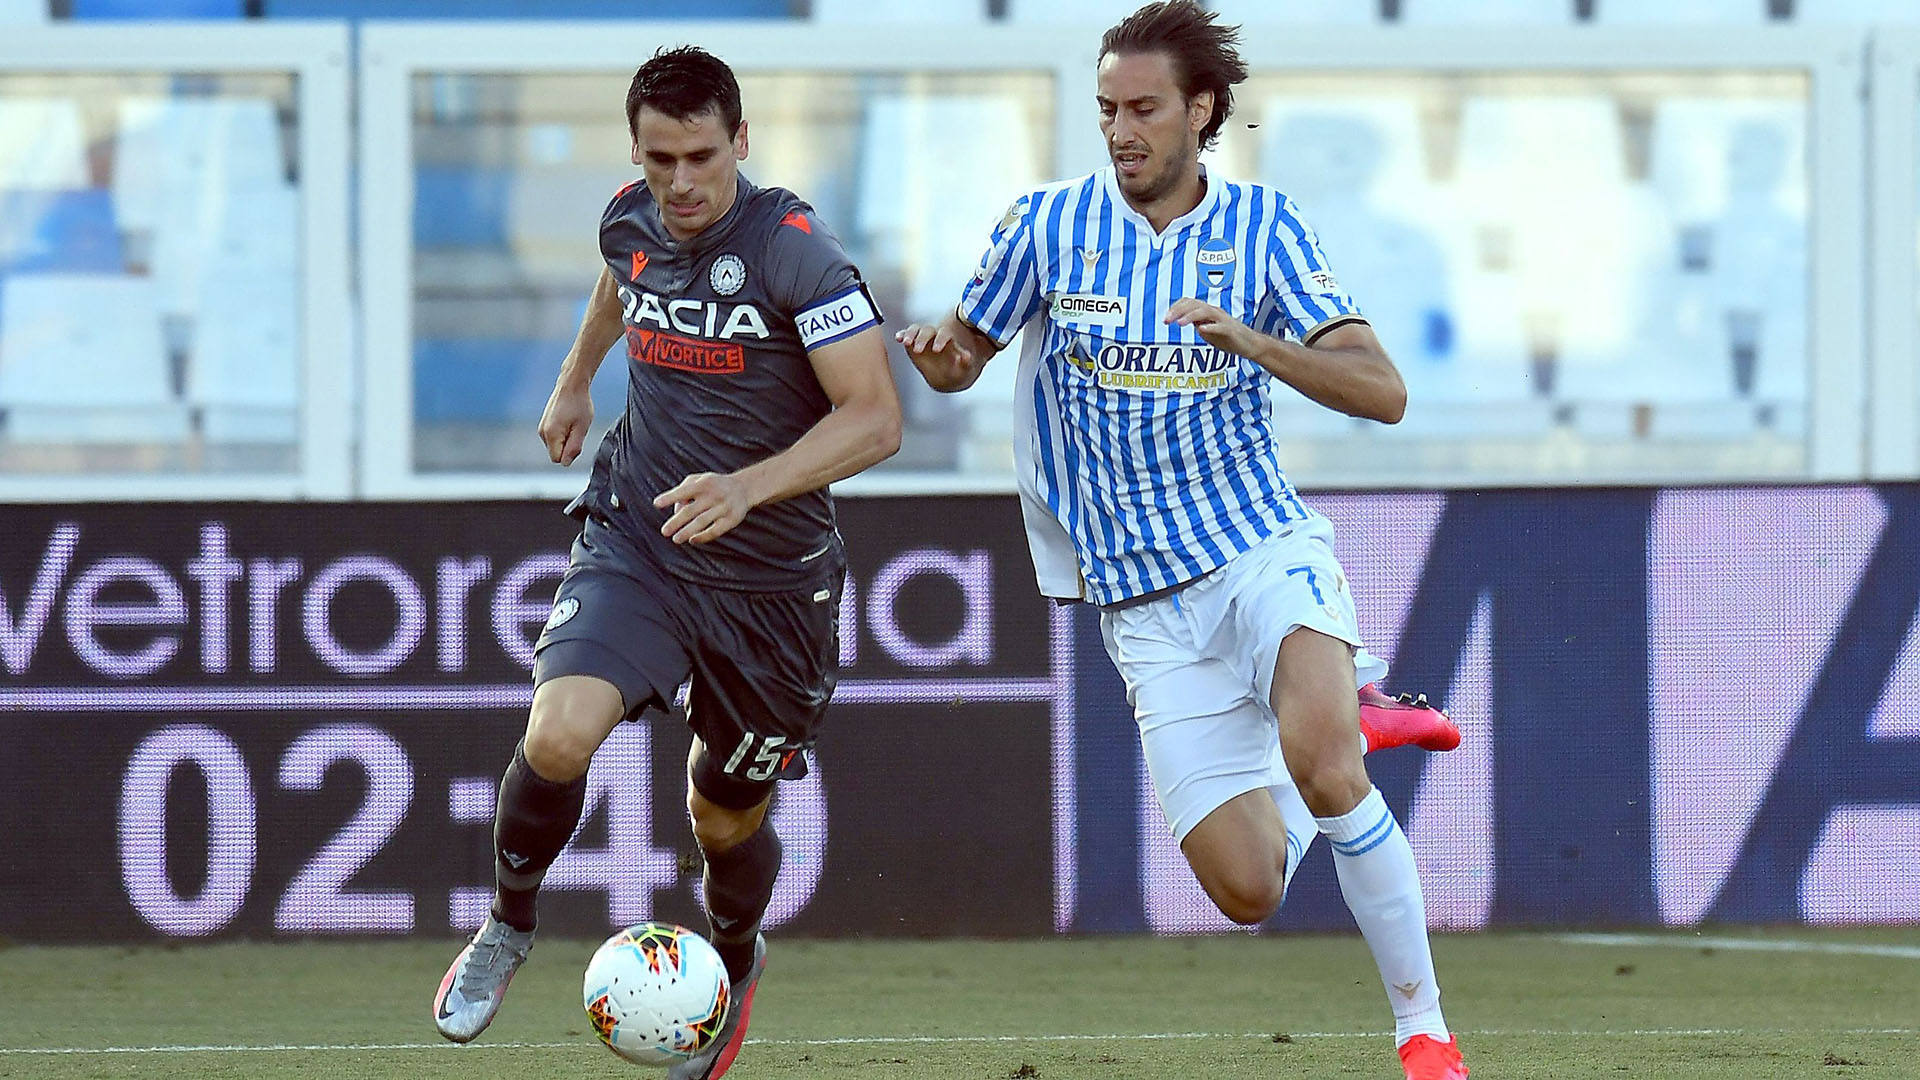 Le foto di Spal-Udinese 0-3